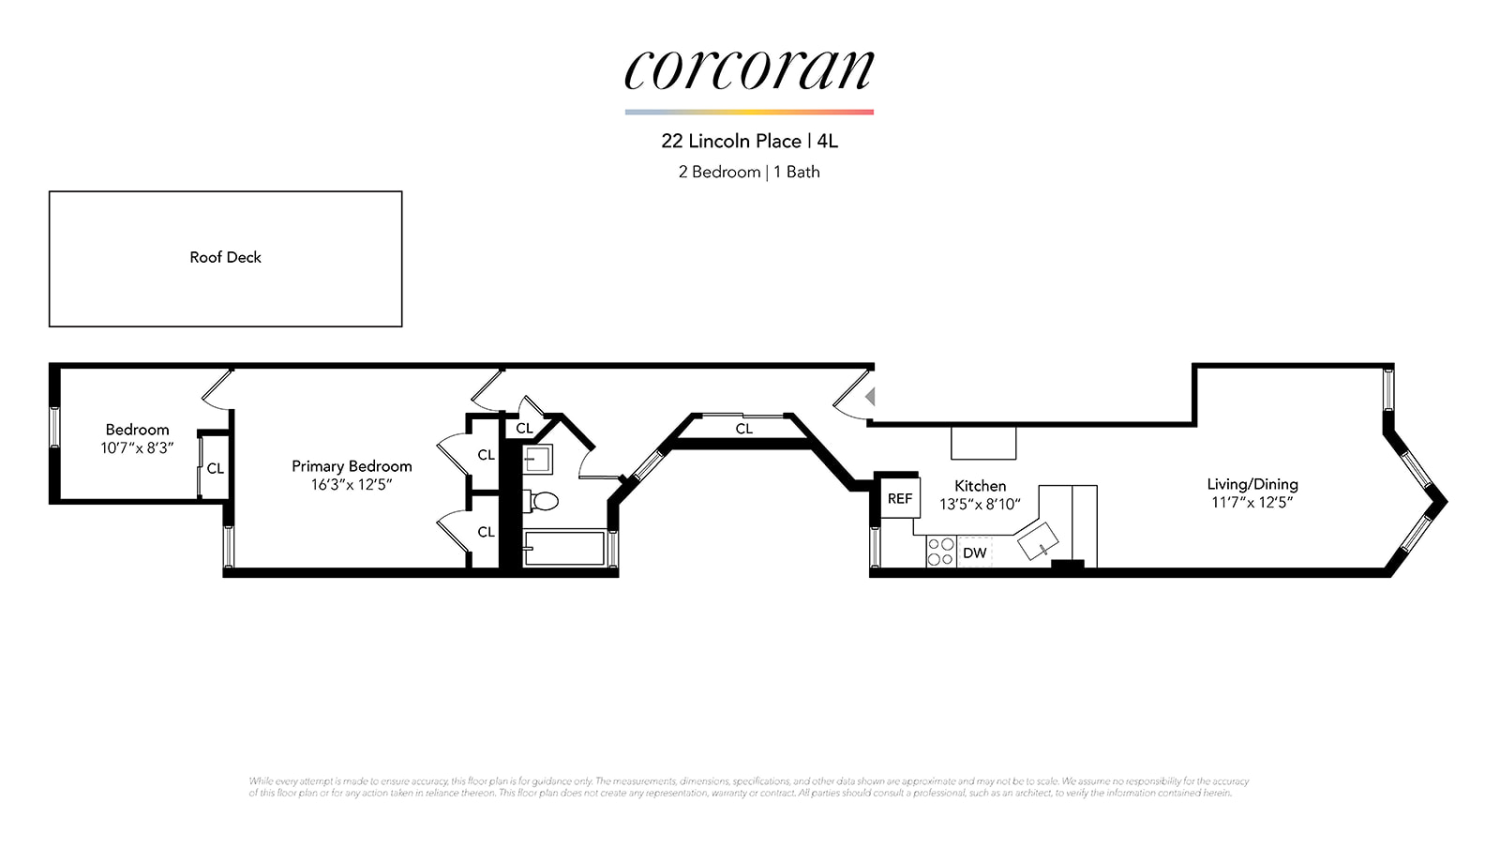 Floorplan for 22 Lincoln Place, 4L